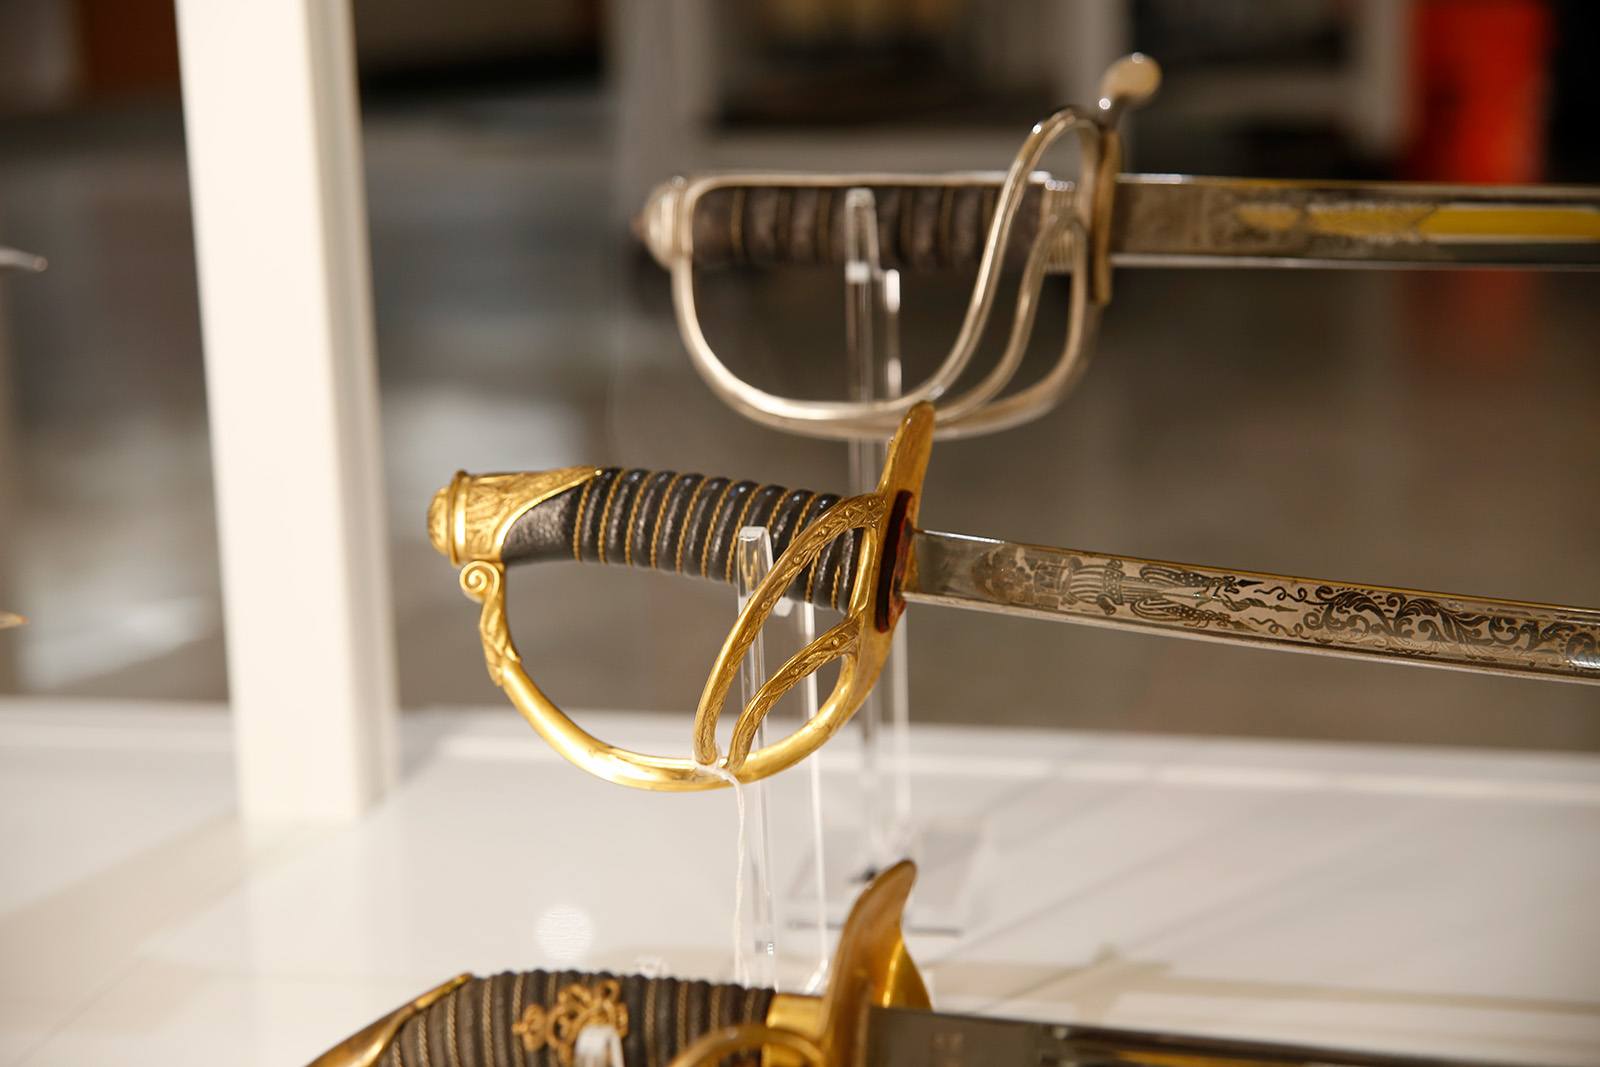 Modern photograph of a glass display case featuring three swords - focusing on the artfully engraved blades and hilts